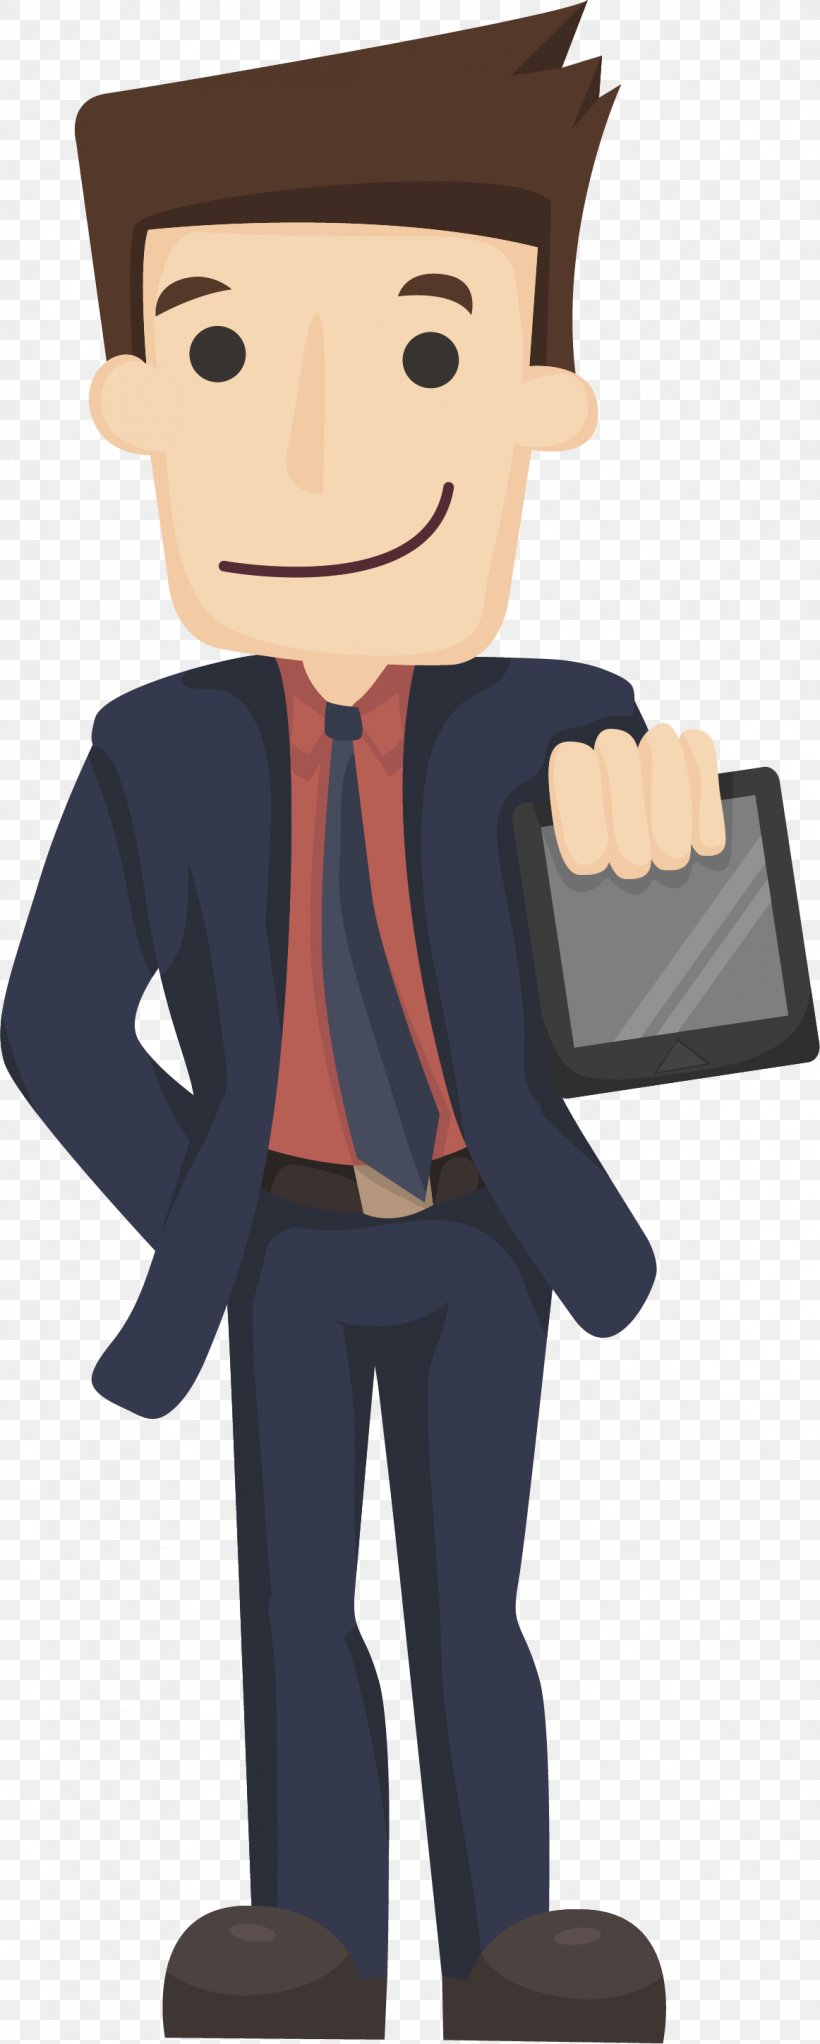 Businessperson Cartoon Illustration, PNG, 1162x2897px, Businessperson, Business, Cartoon, Company, Consultant Download Free